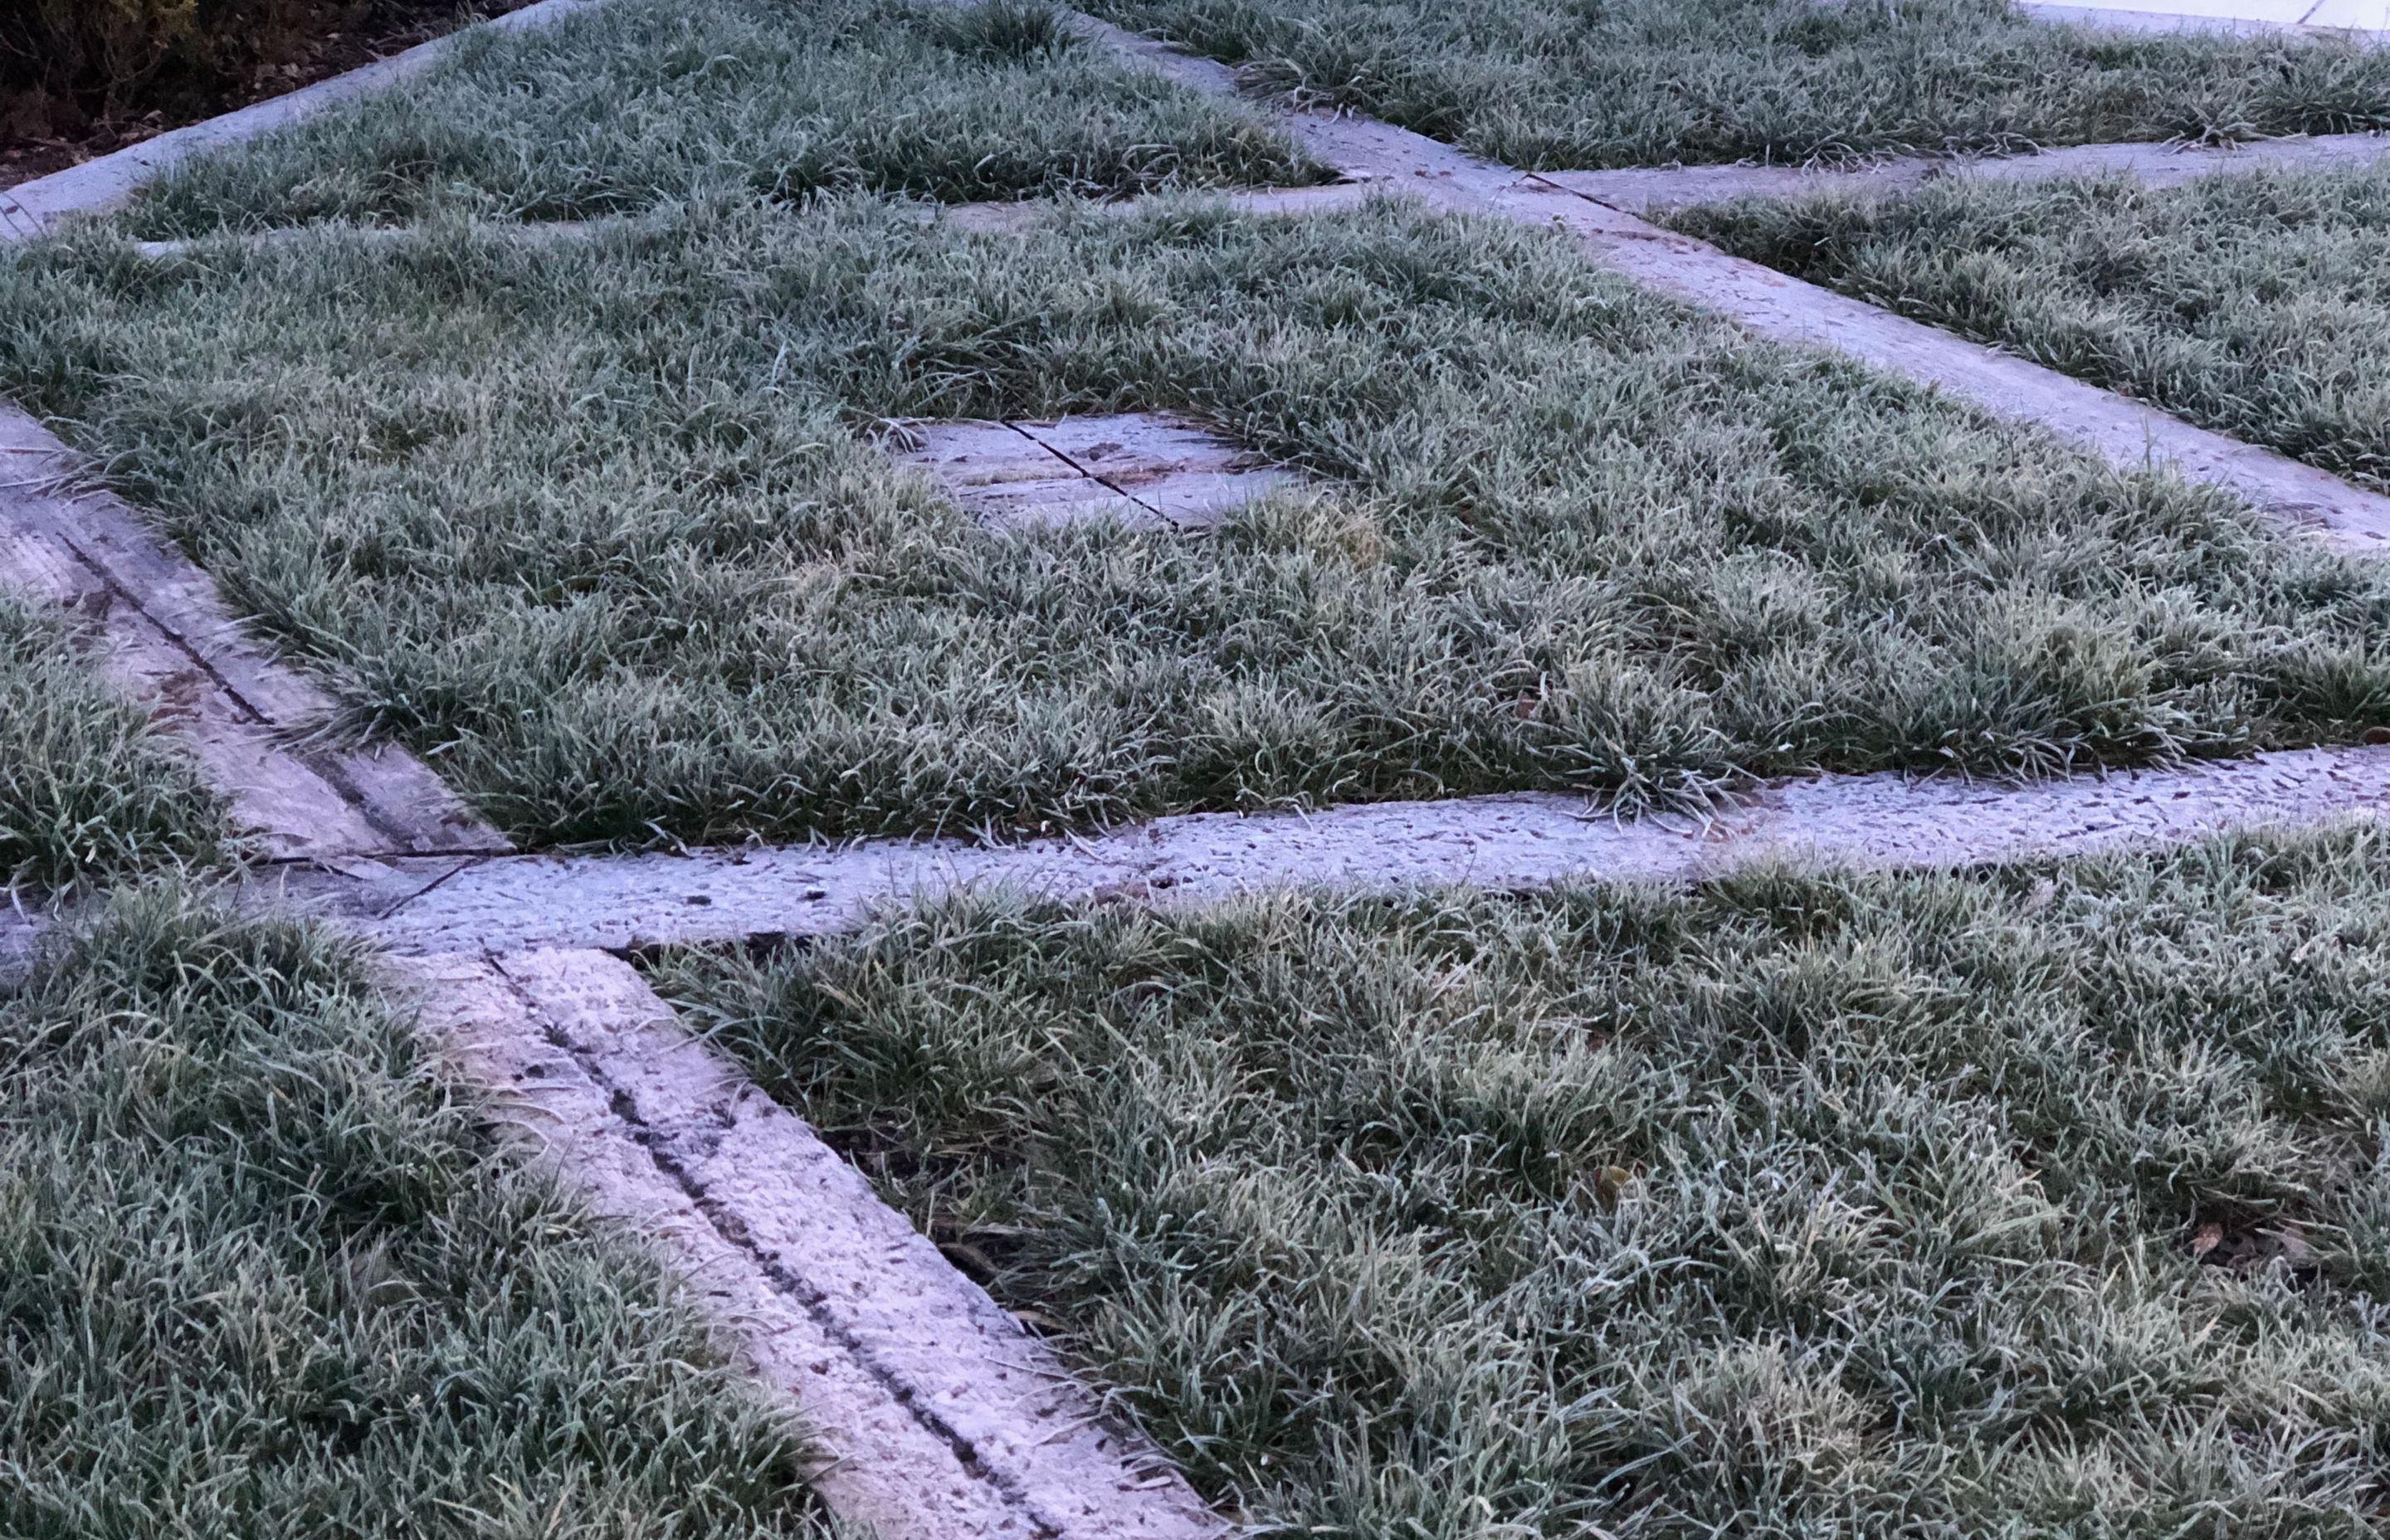 Grass patterns in the winter frost